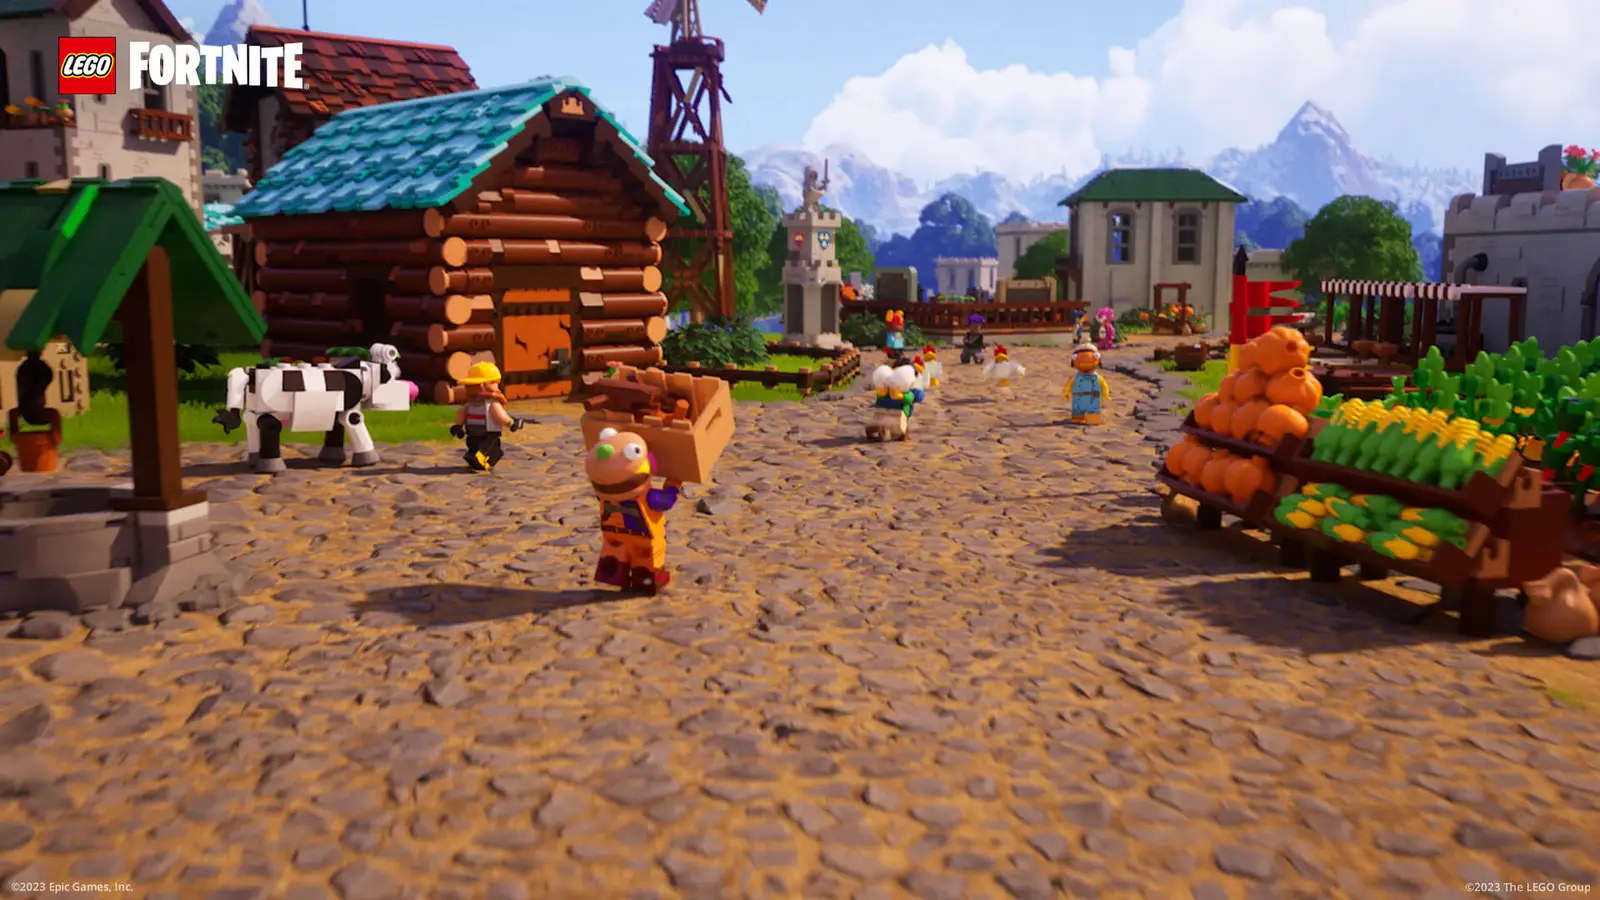 LEGO Fortnite villagers can't sleep due to this bed bug